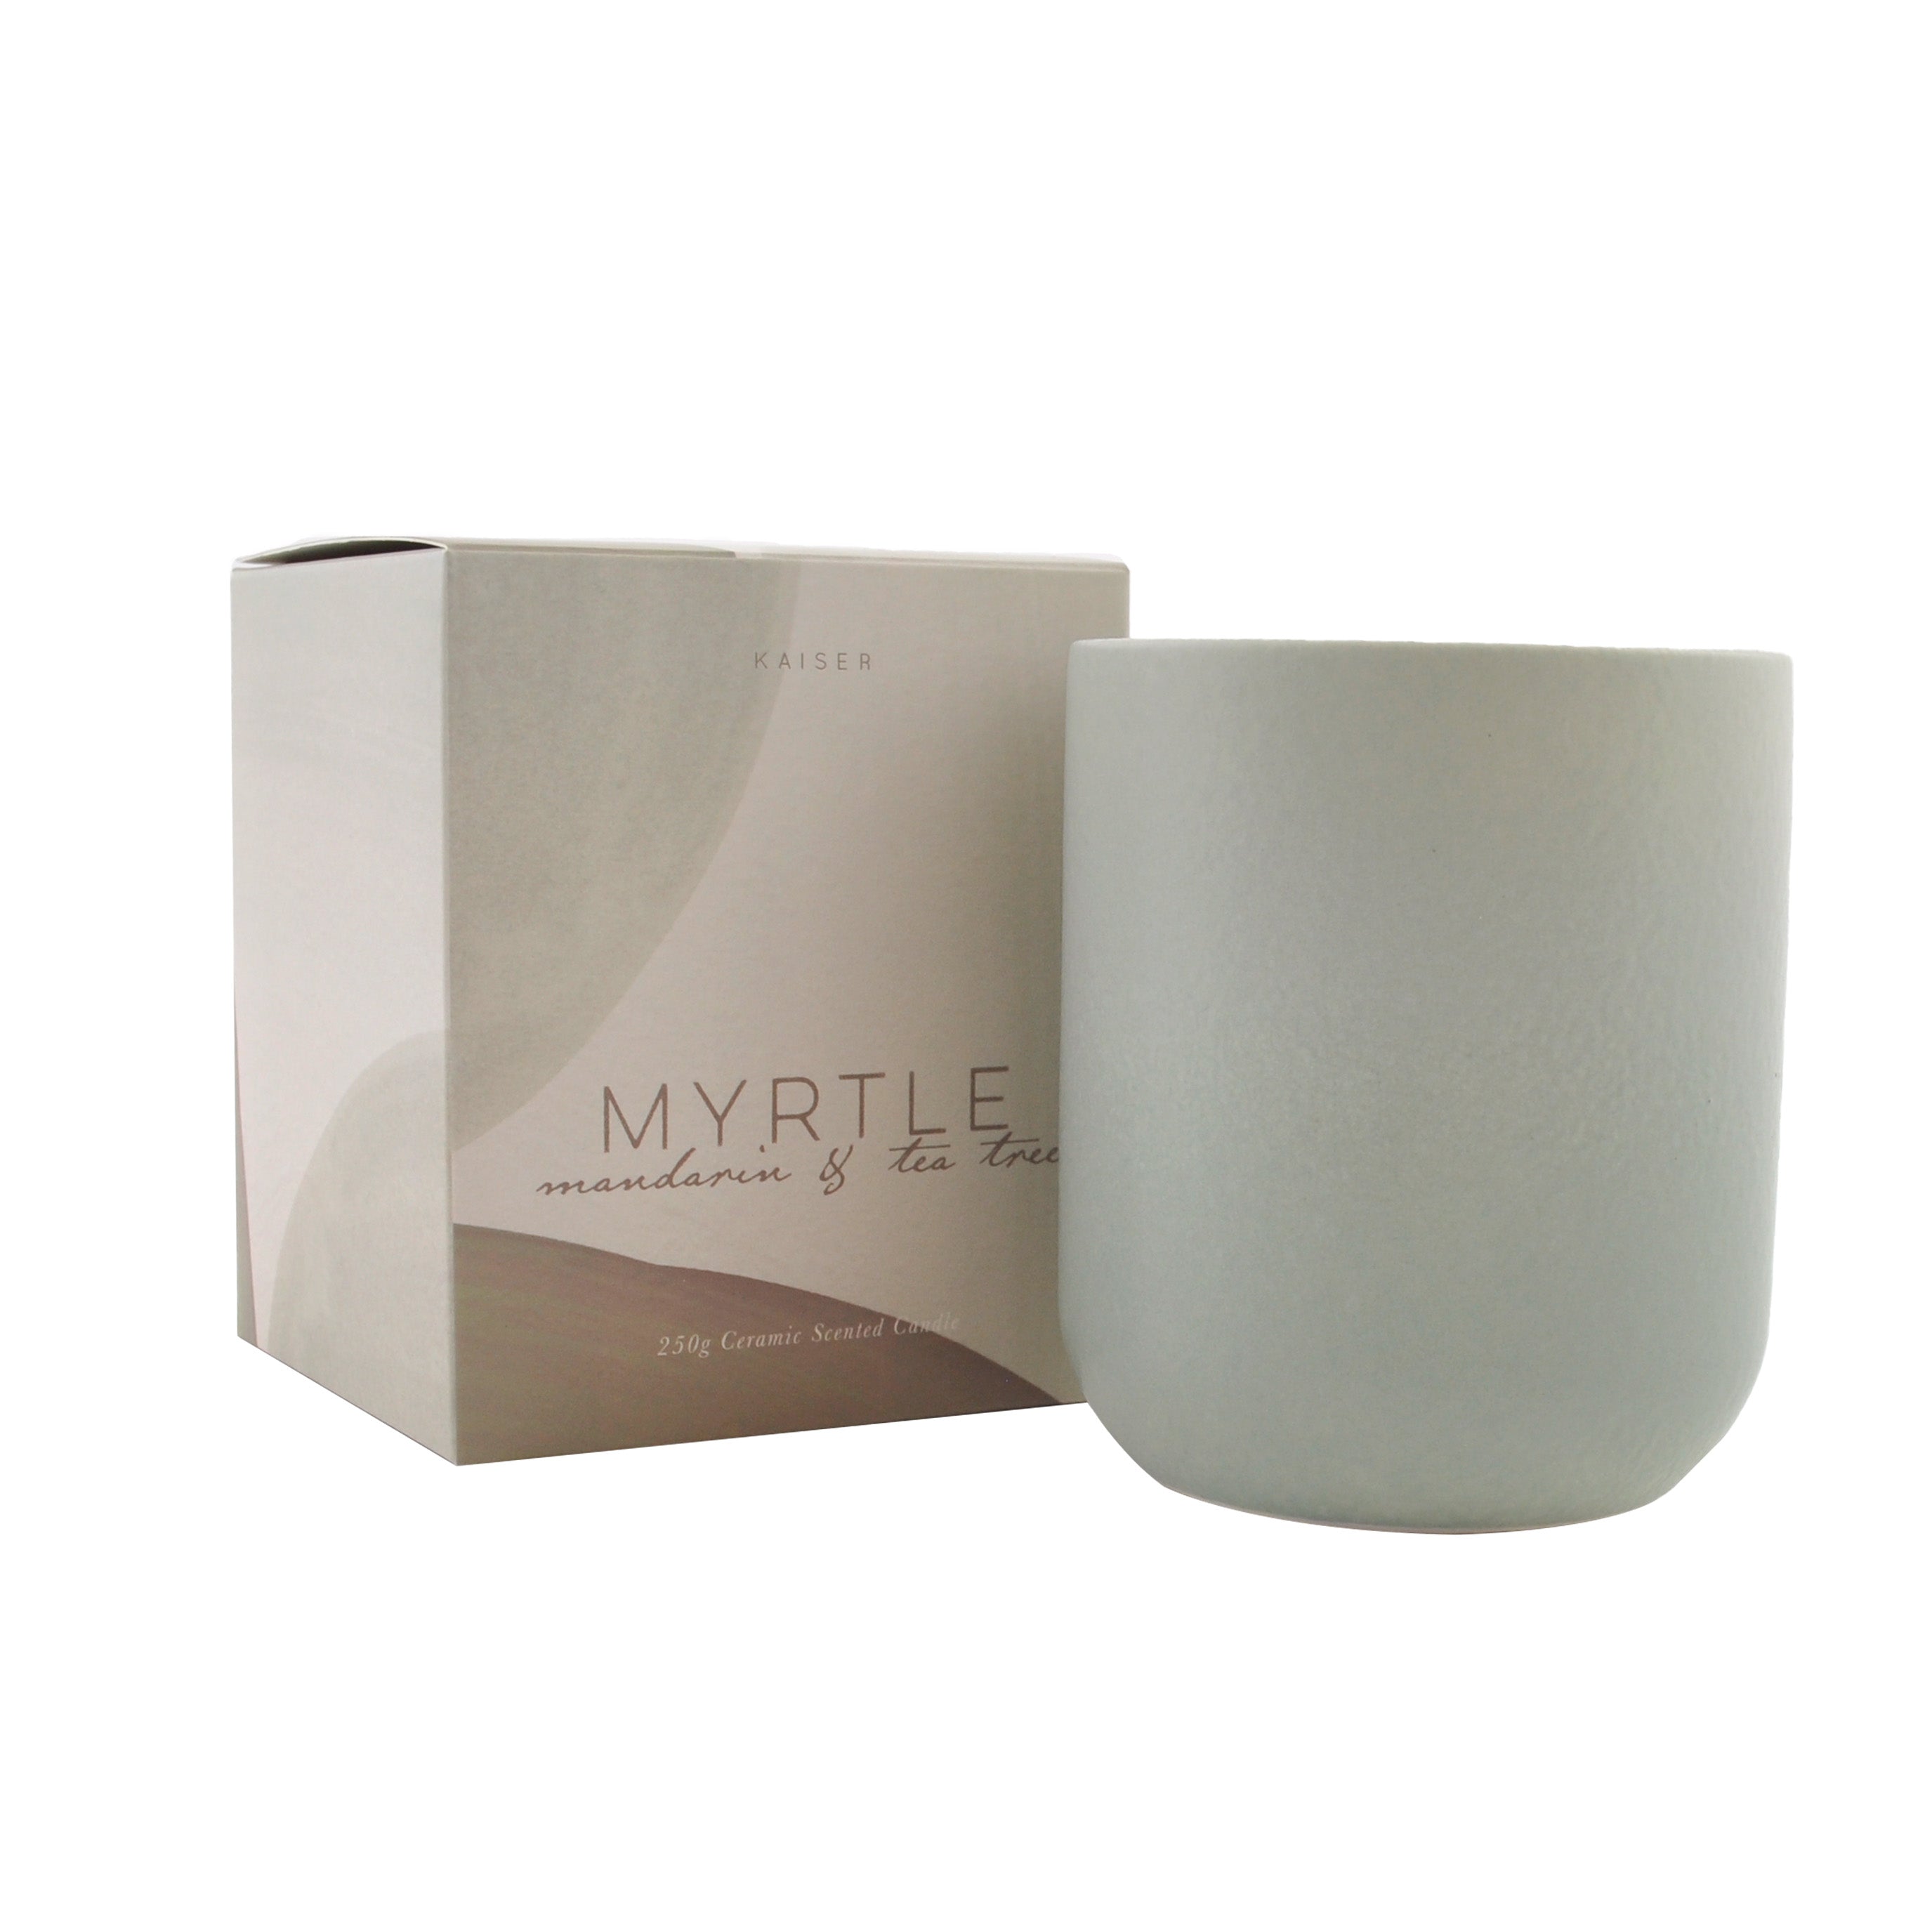 Native Collection Candle 250g - Myrtle, Mandarin & Tea Tree